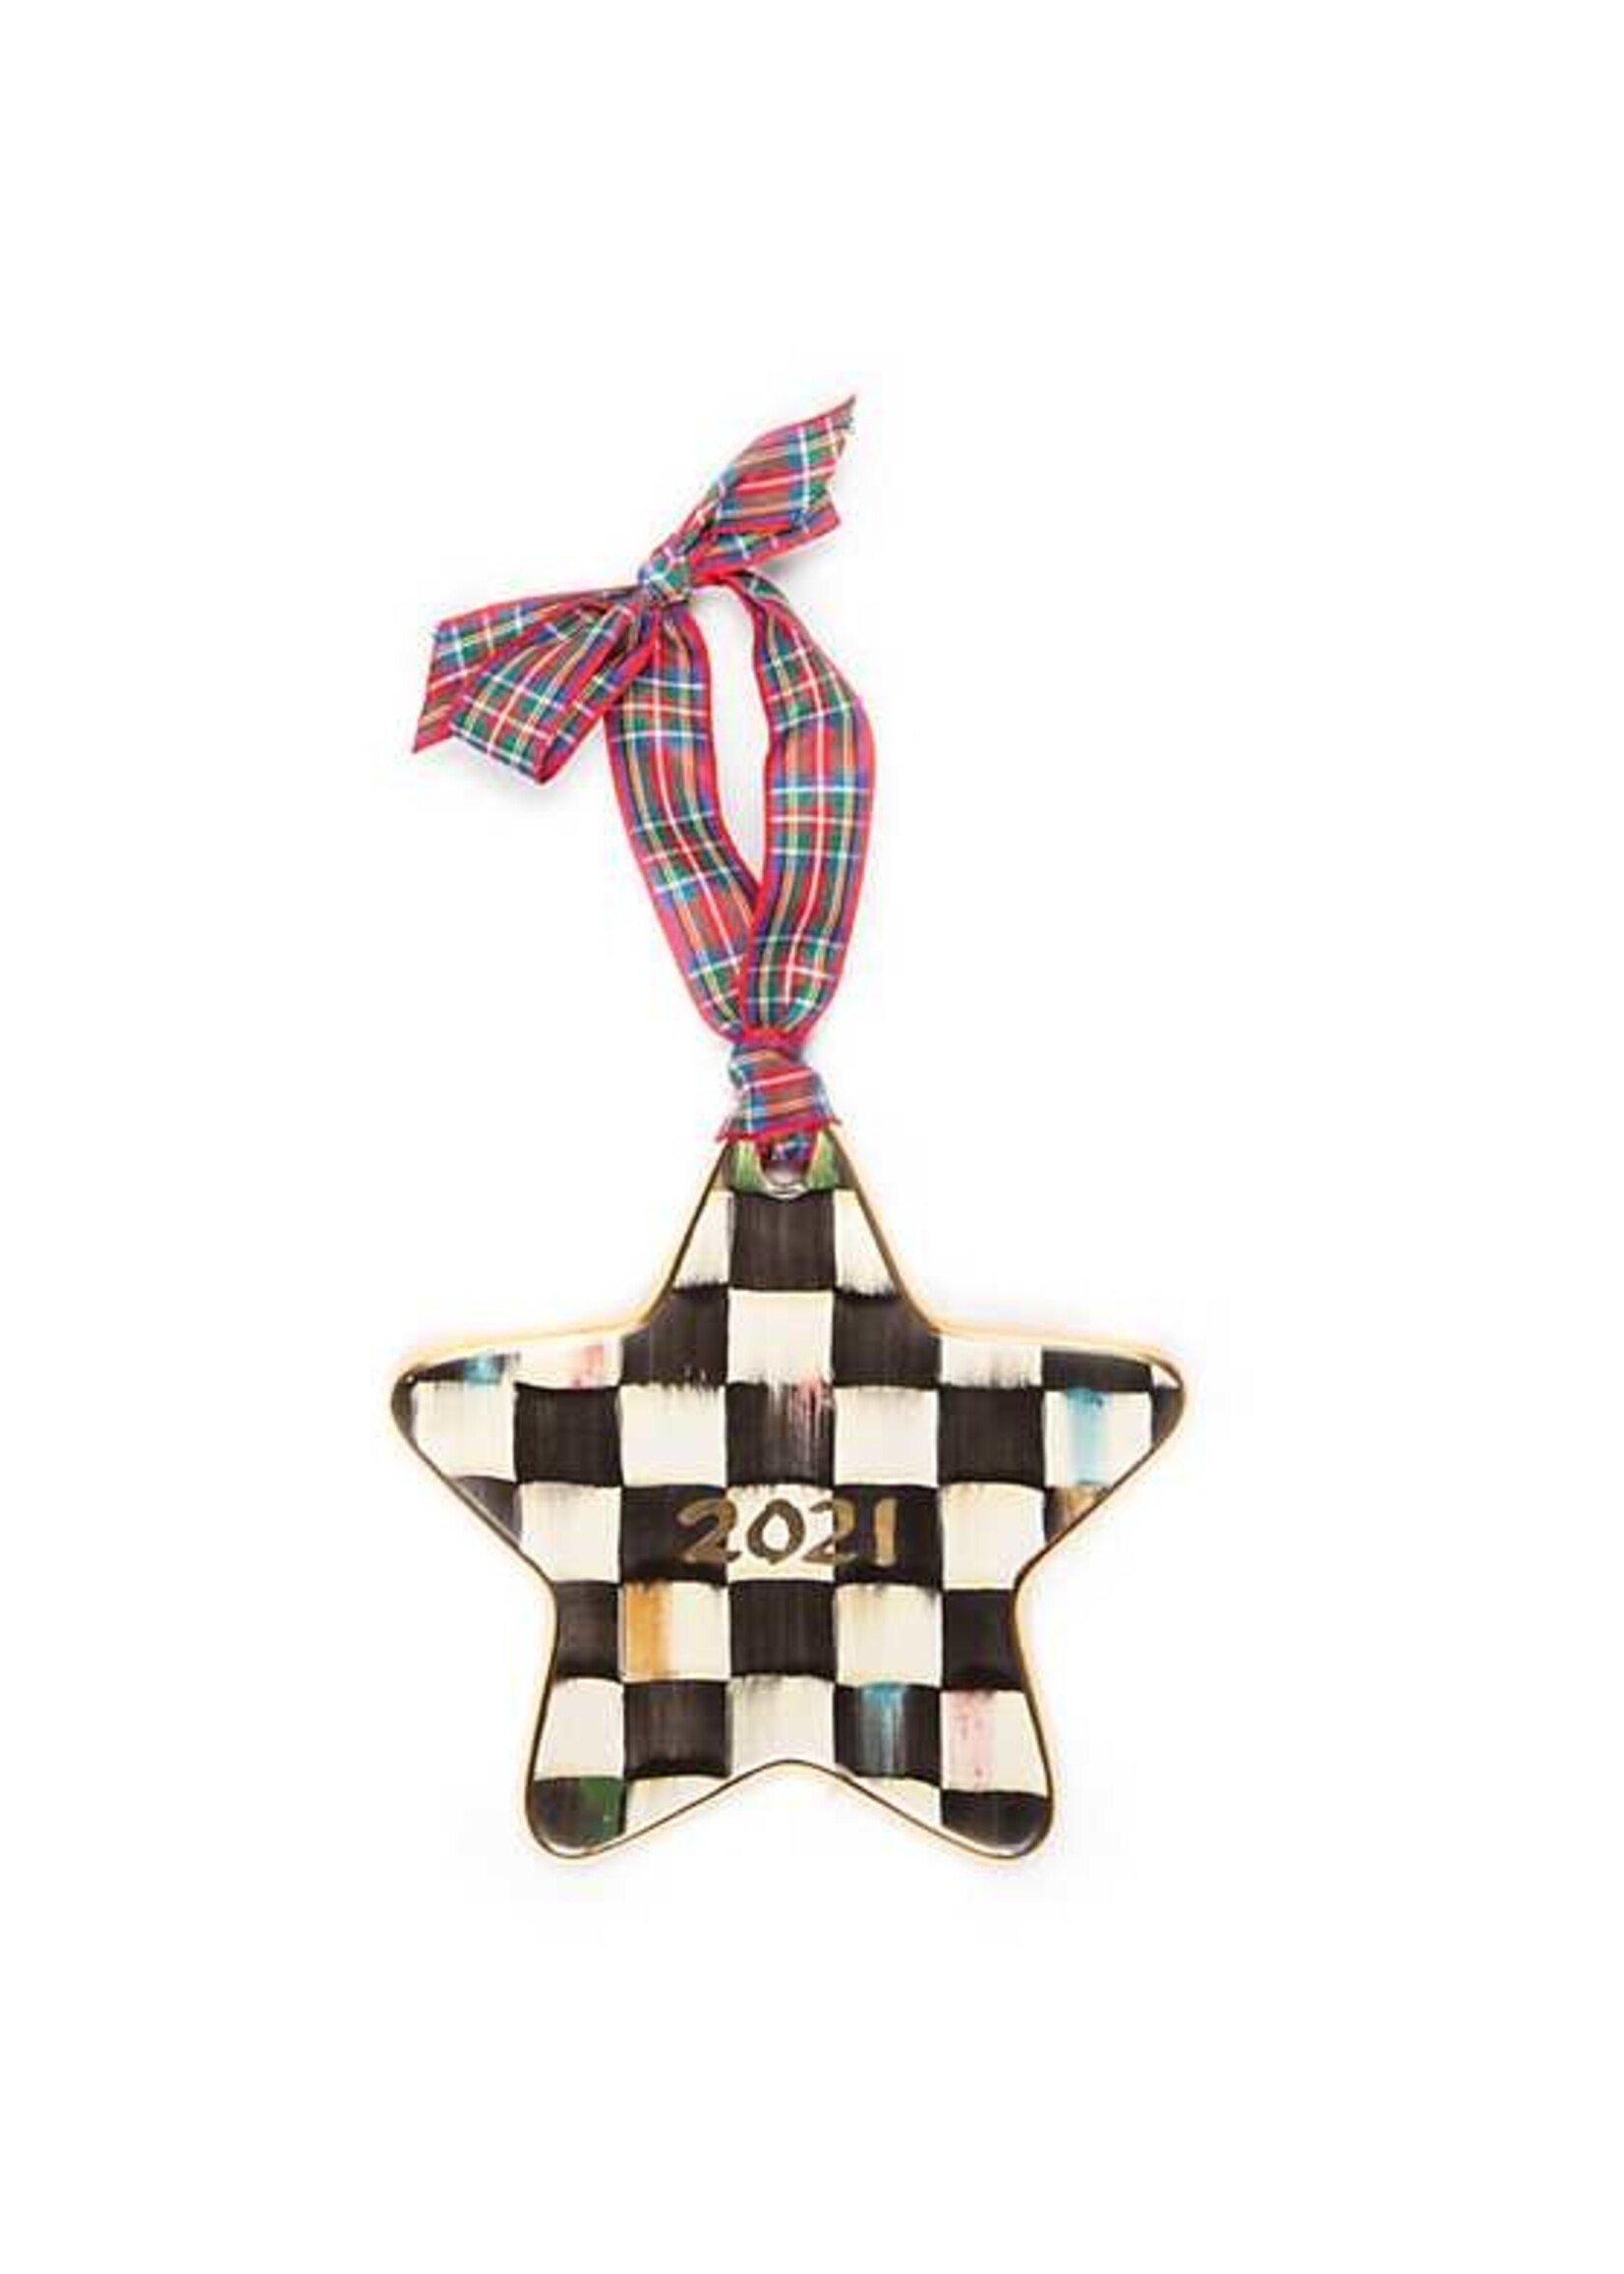 MacKenzie-Childs Courtly check Star Ornament